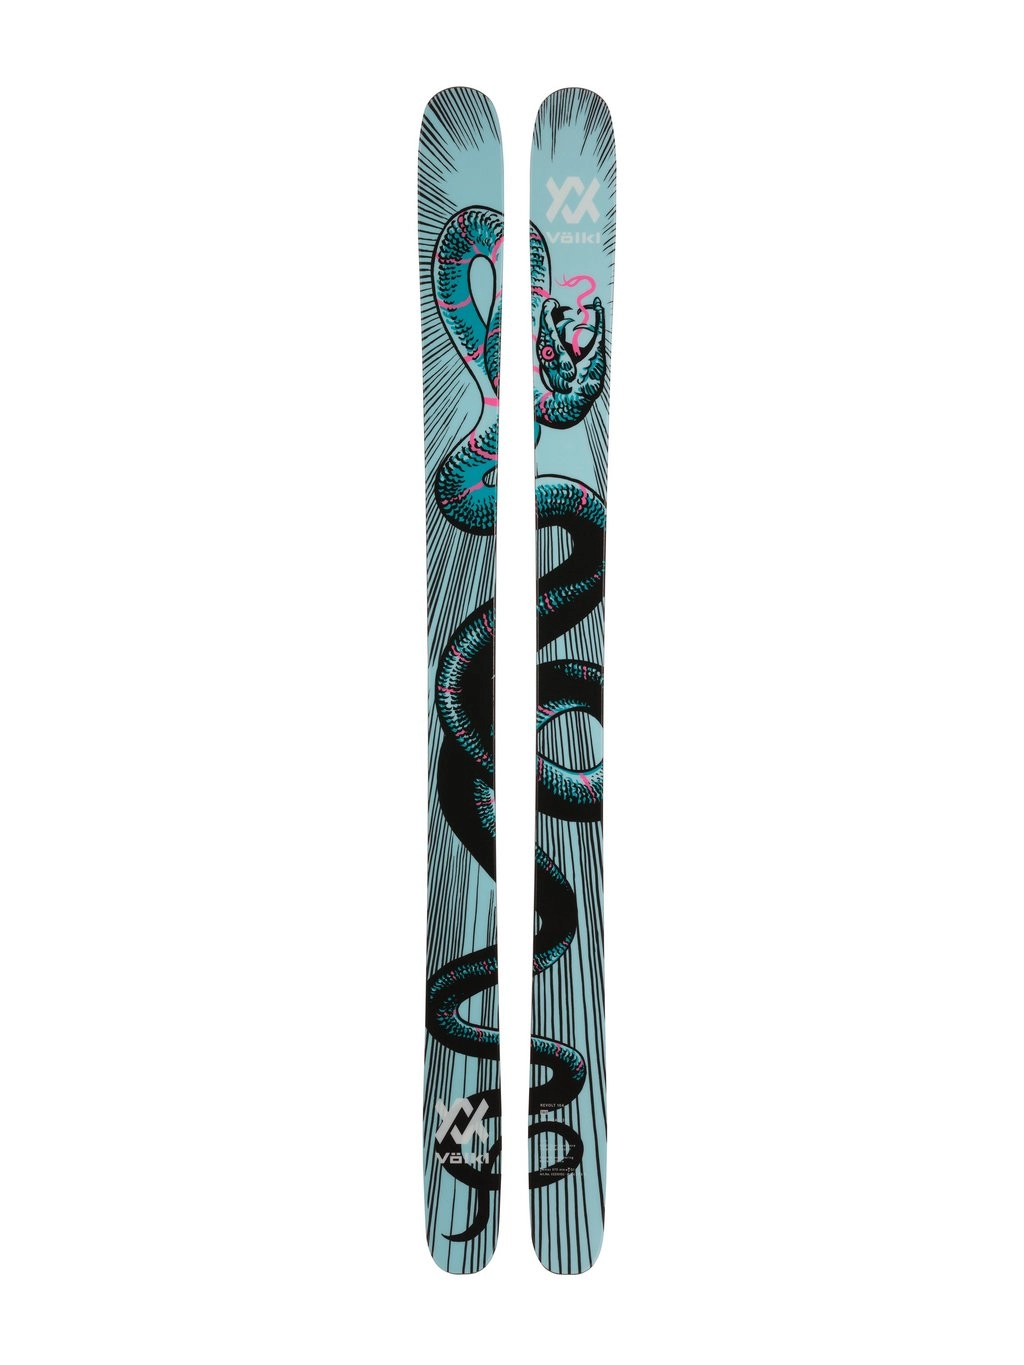 2023/24 Volkl Revolt 104 Skis | The BackCountry in Truckee, CA